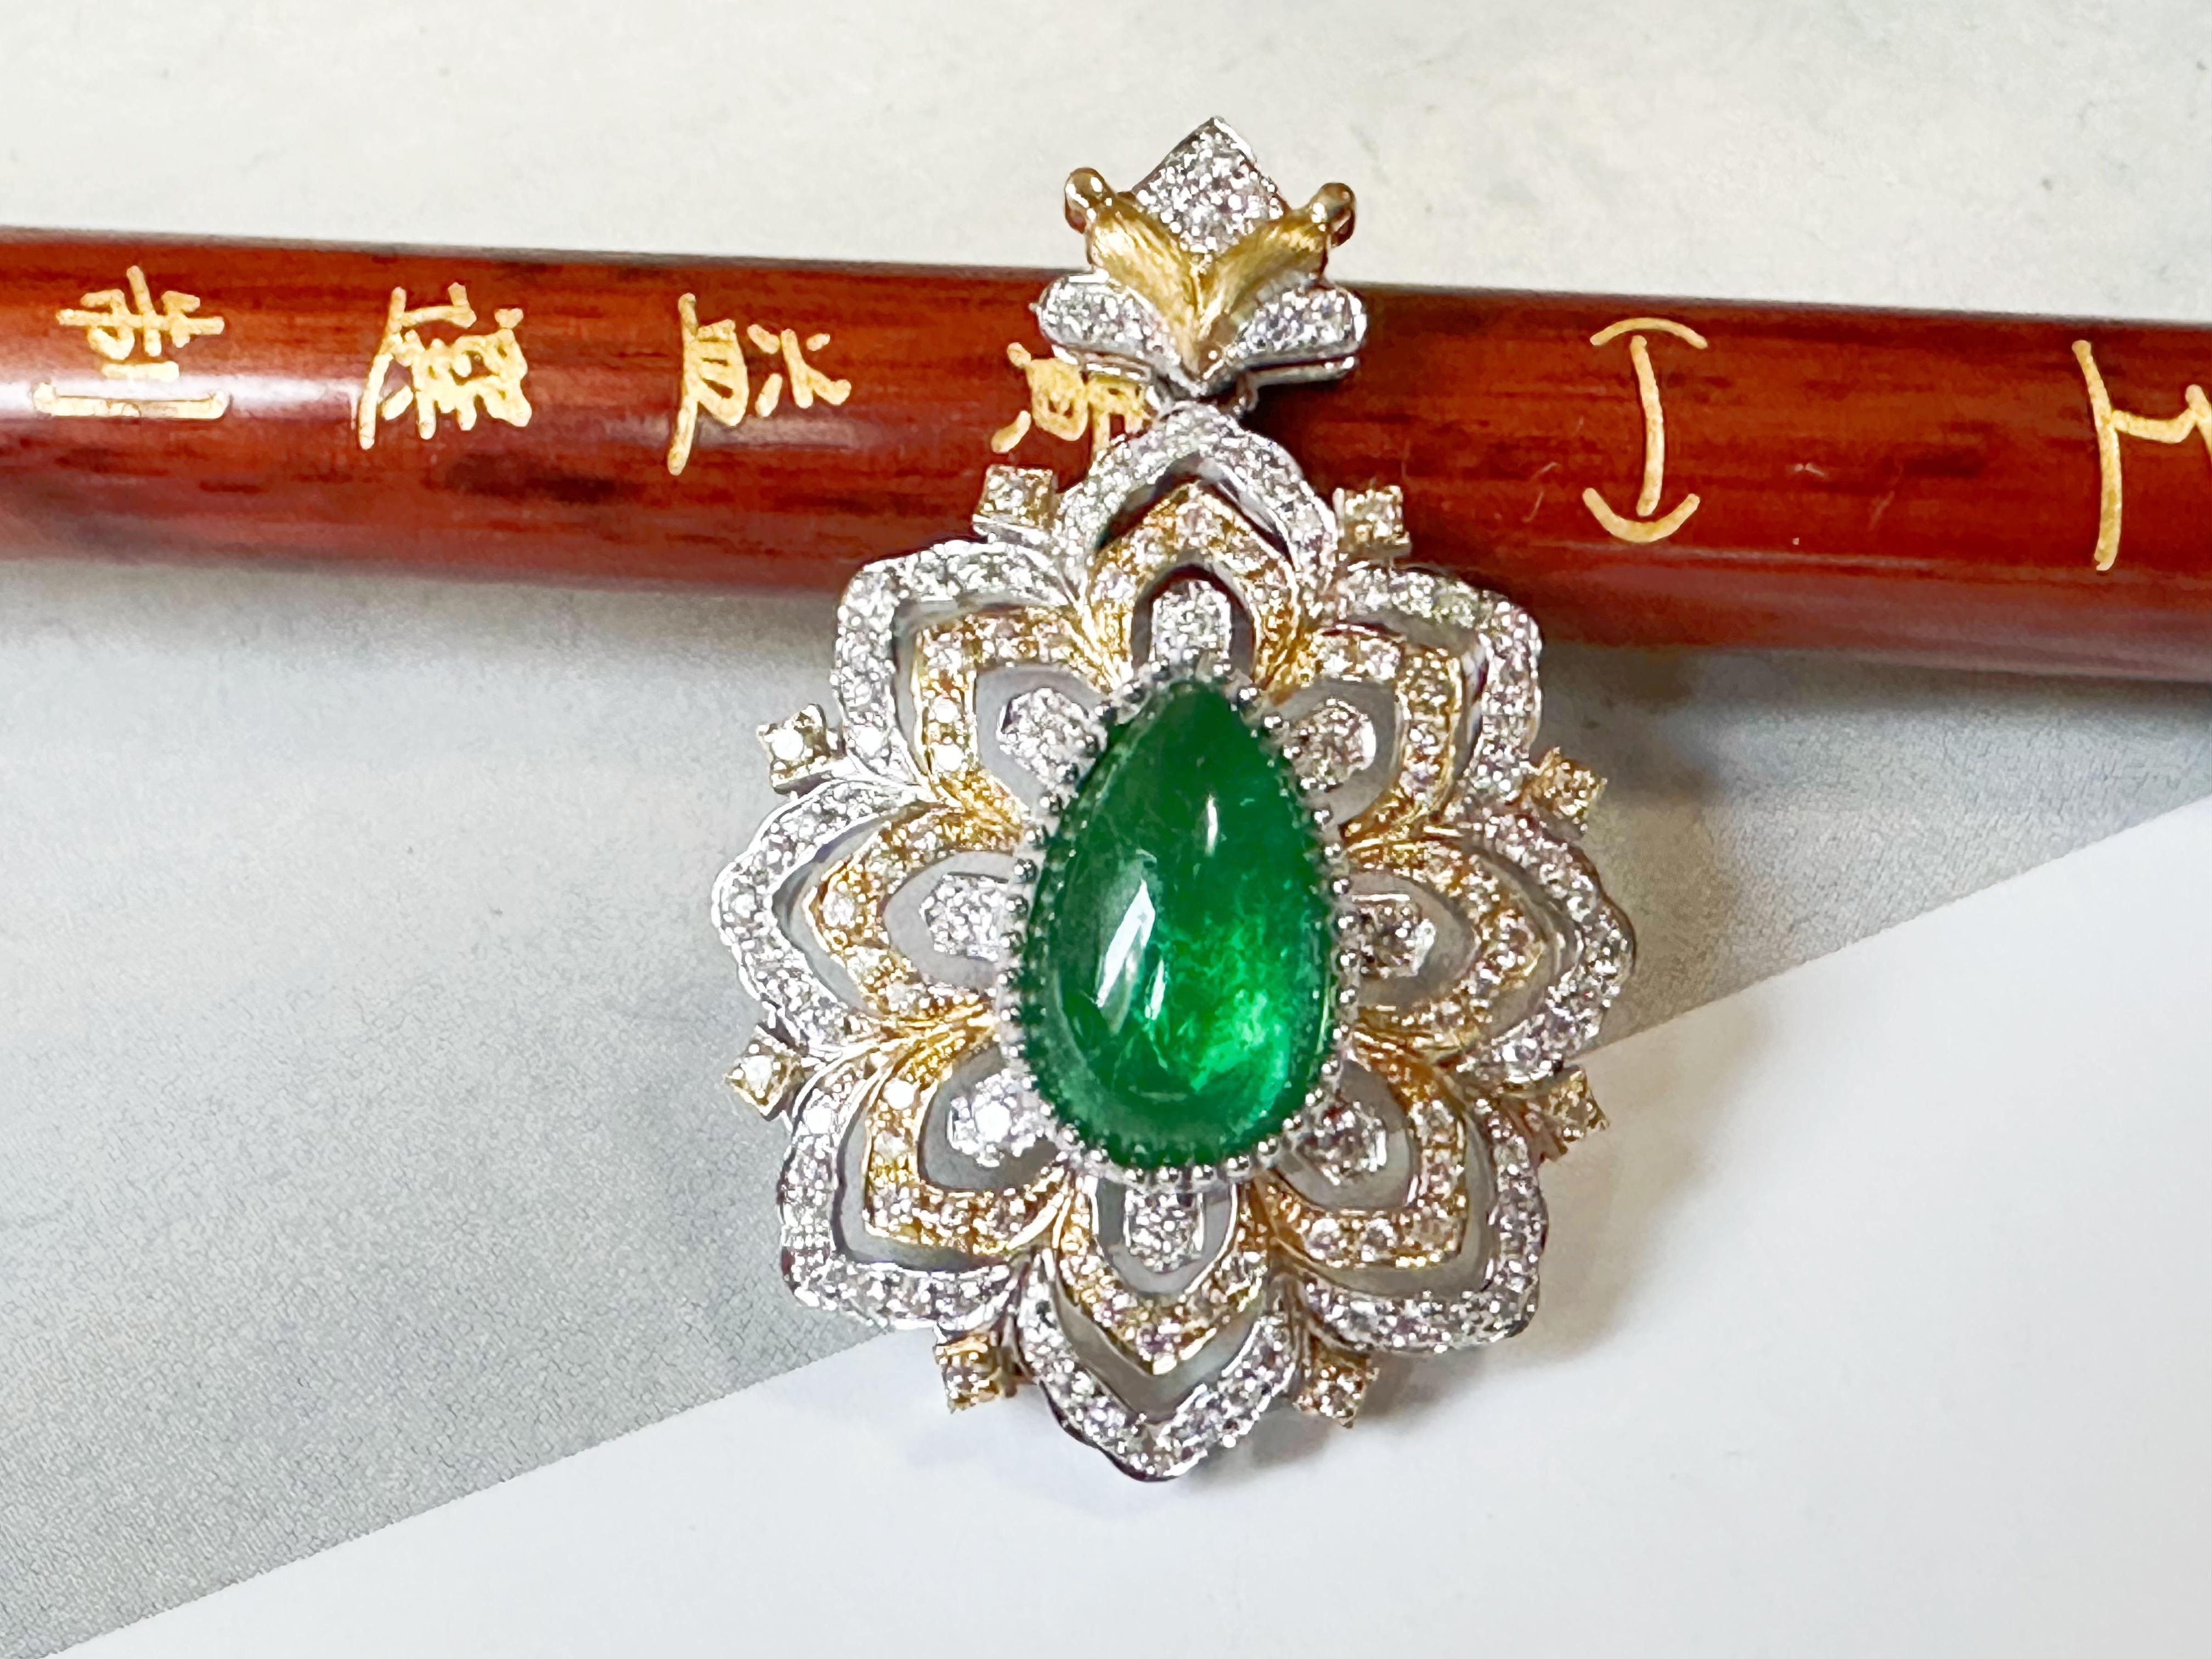 Elevate your jewelry collection with our stunning natural vivid green emerald pendant. Ethically sourced from Zambia, this handcrafted pendant exudes a timeless and antique style.

Crafted with a pear-shaped emerald, the pendant showcases a vivid